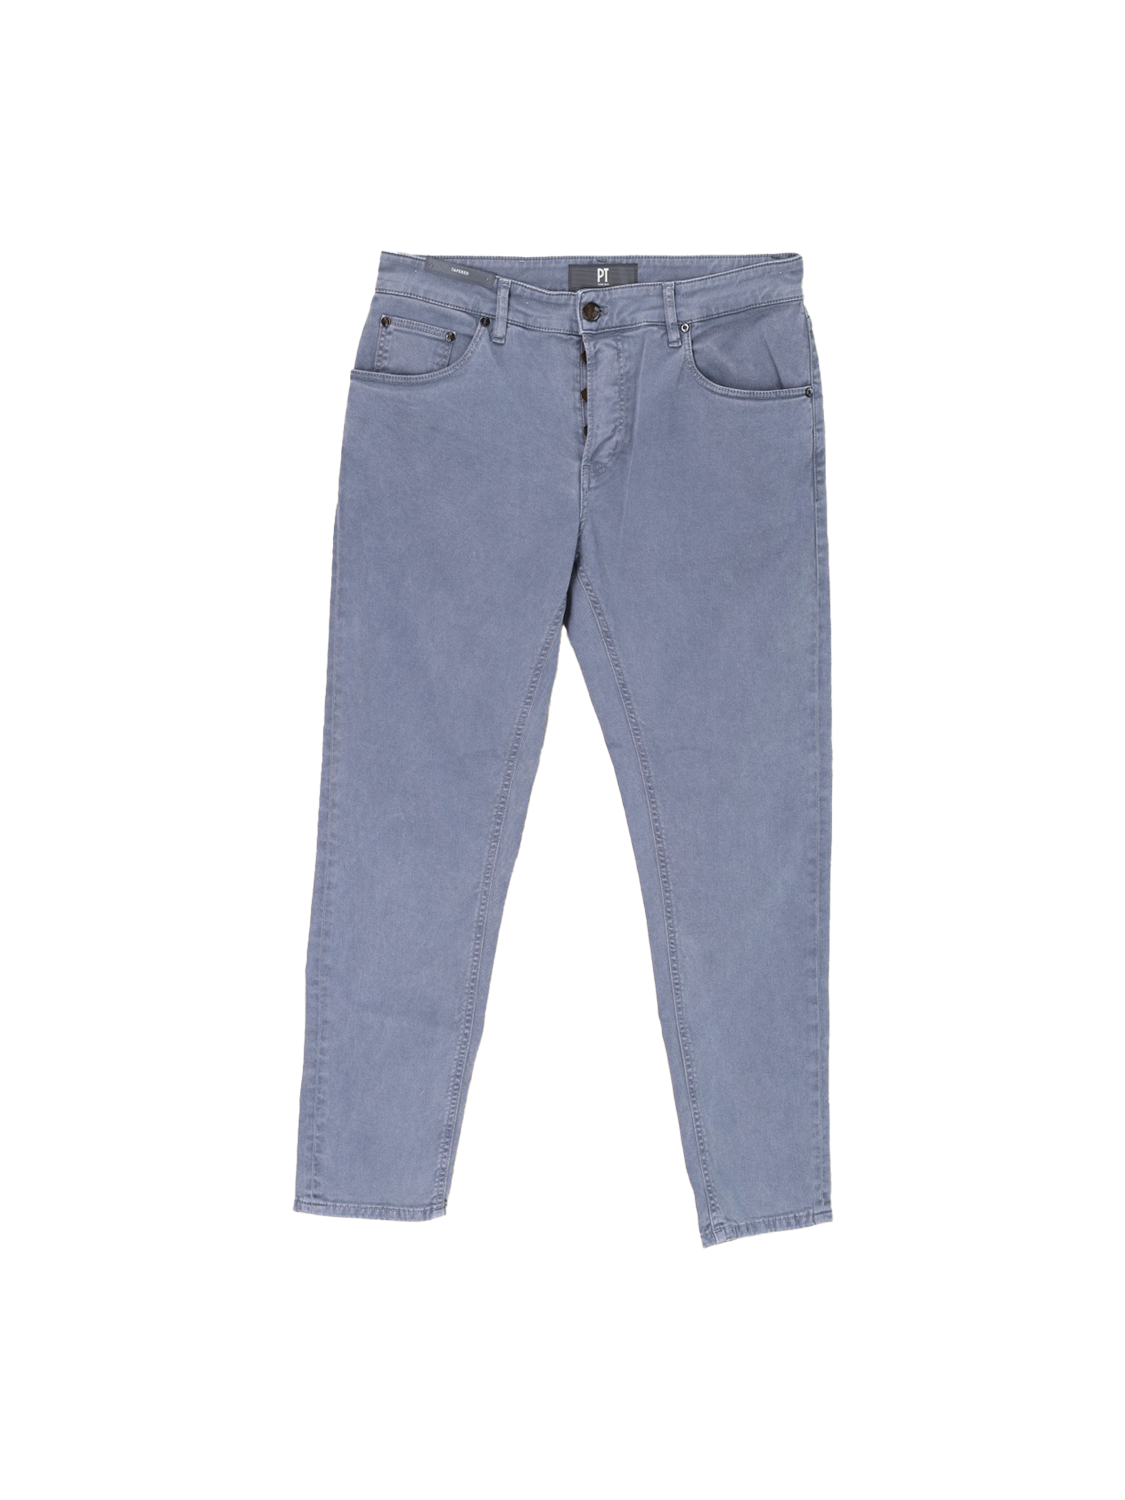 Tapered – Jeans Baumwoll-Mix  